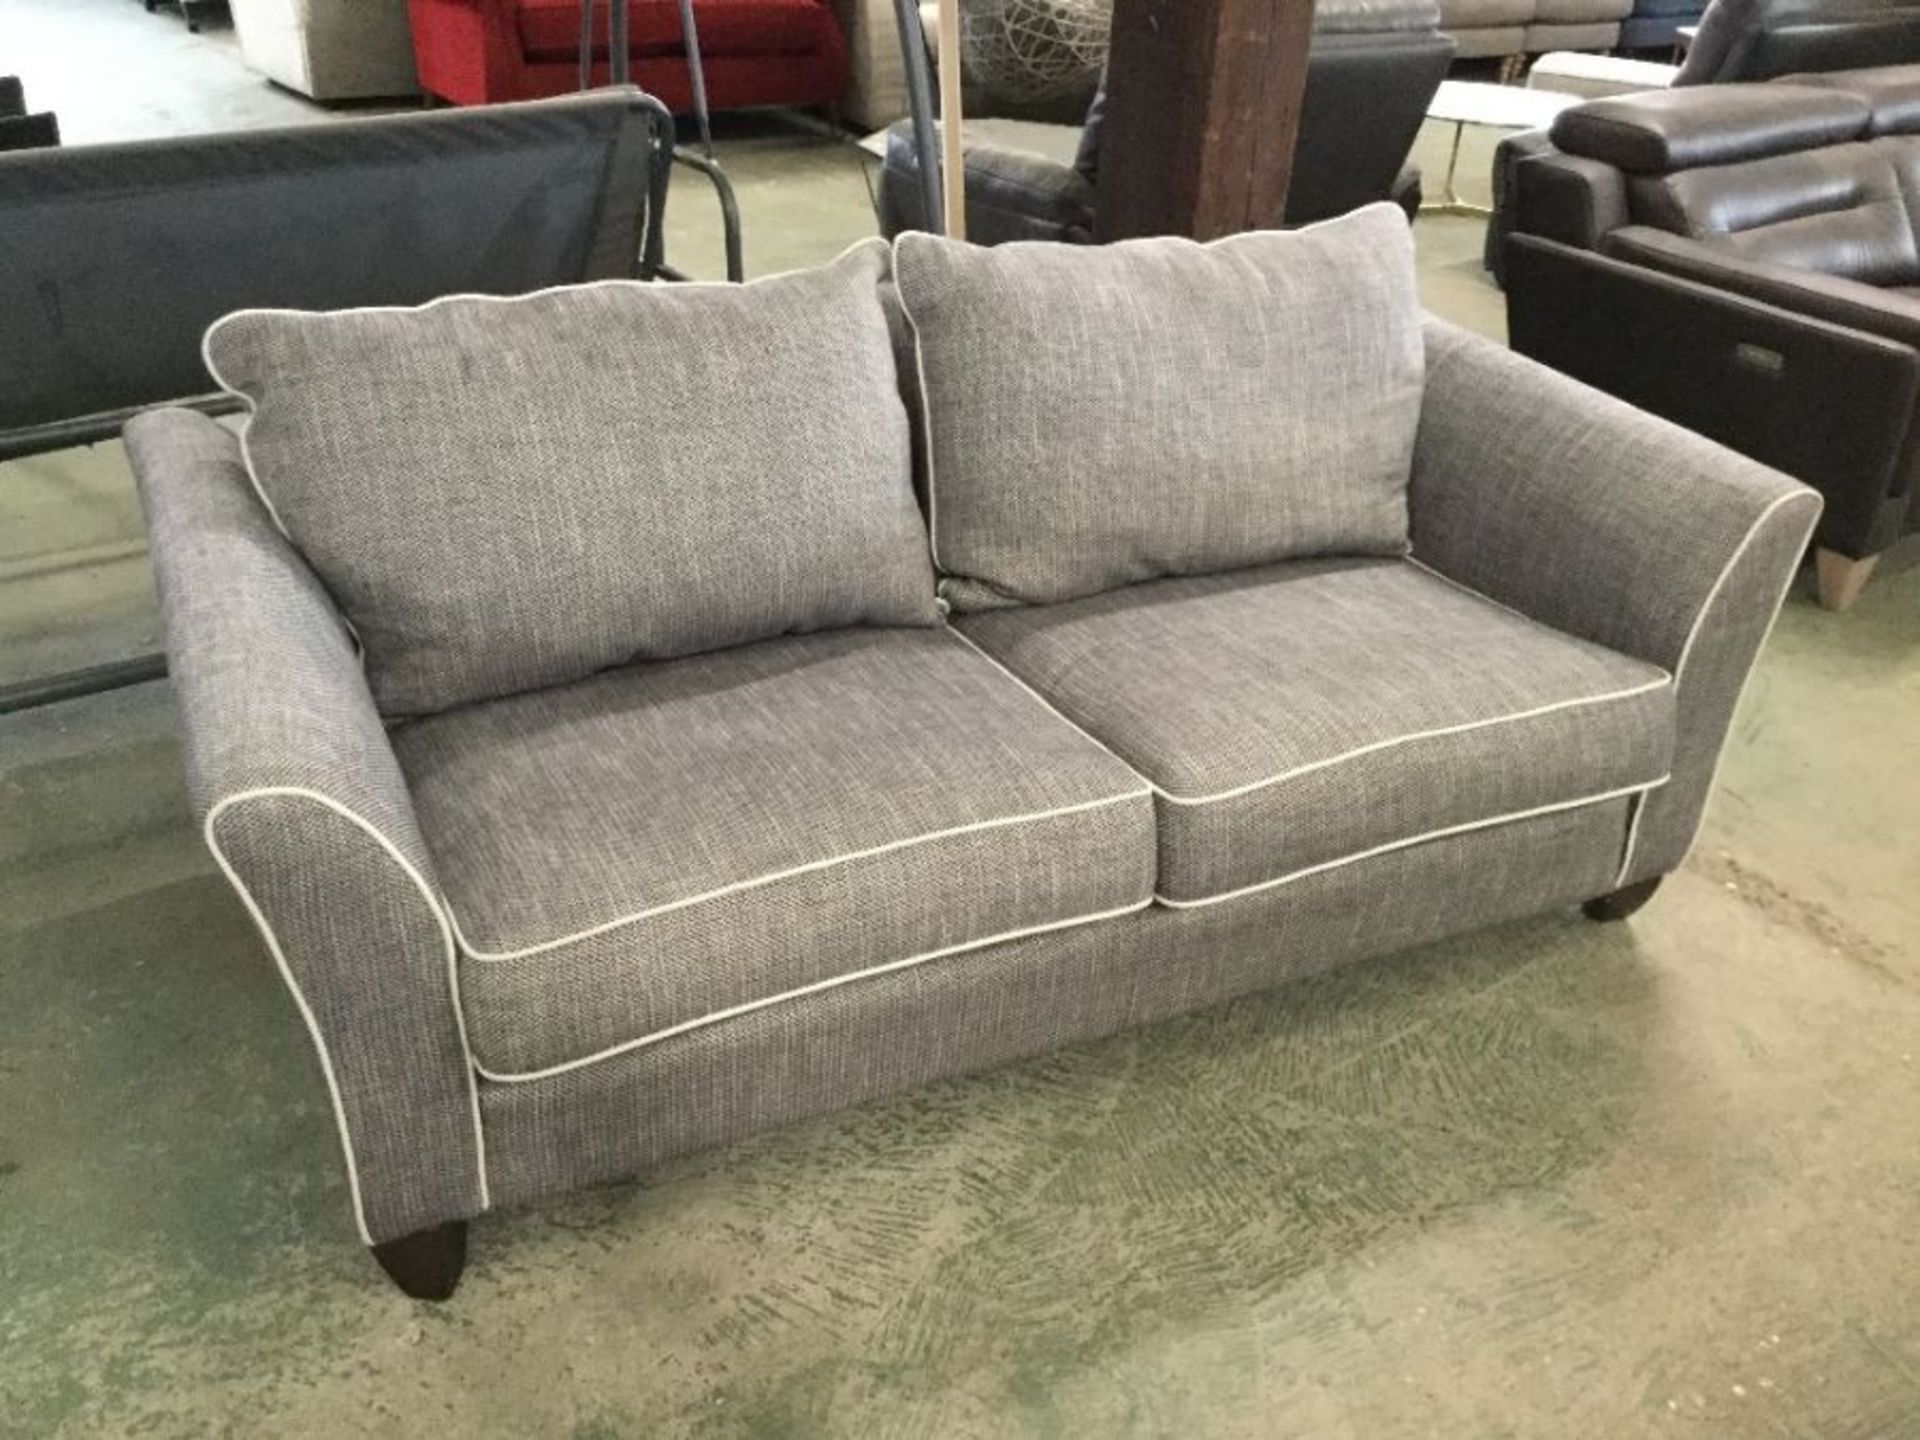 GREY PATTERNED WITH WHITE BEADING 3 SEATER SOFA (P